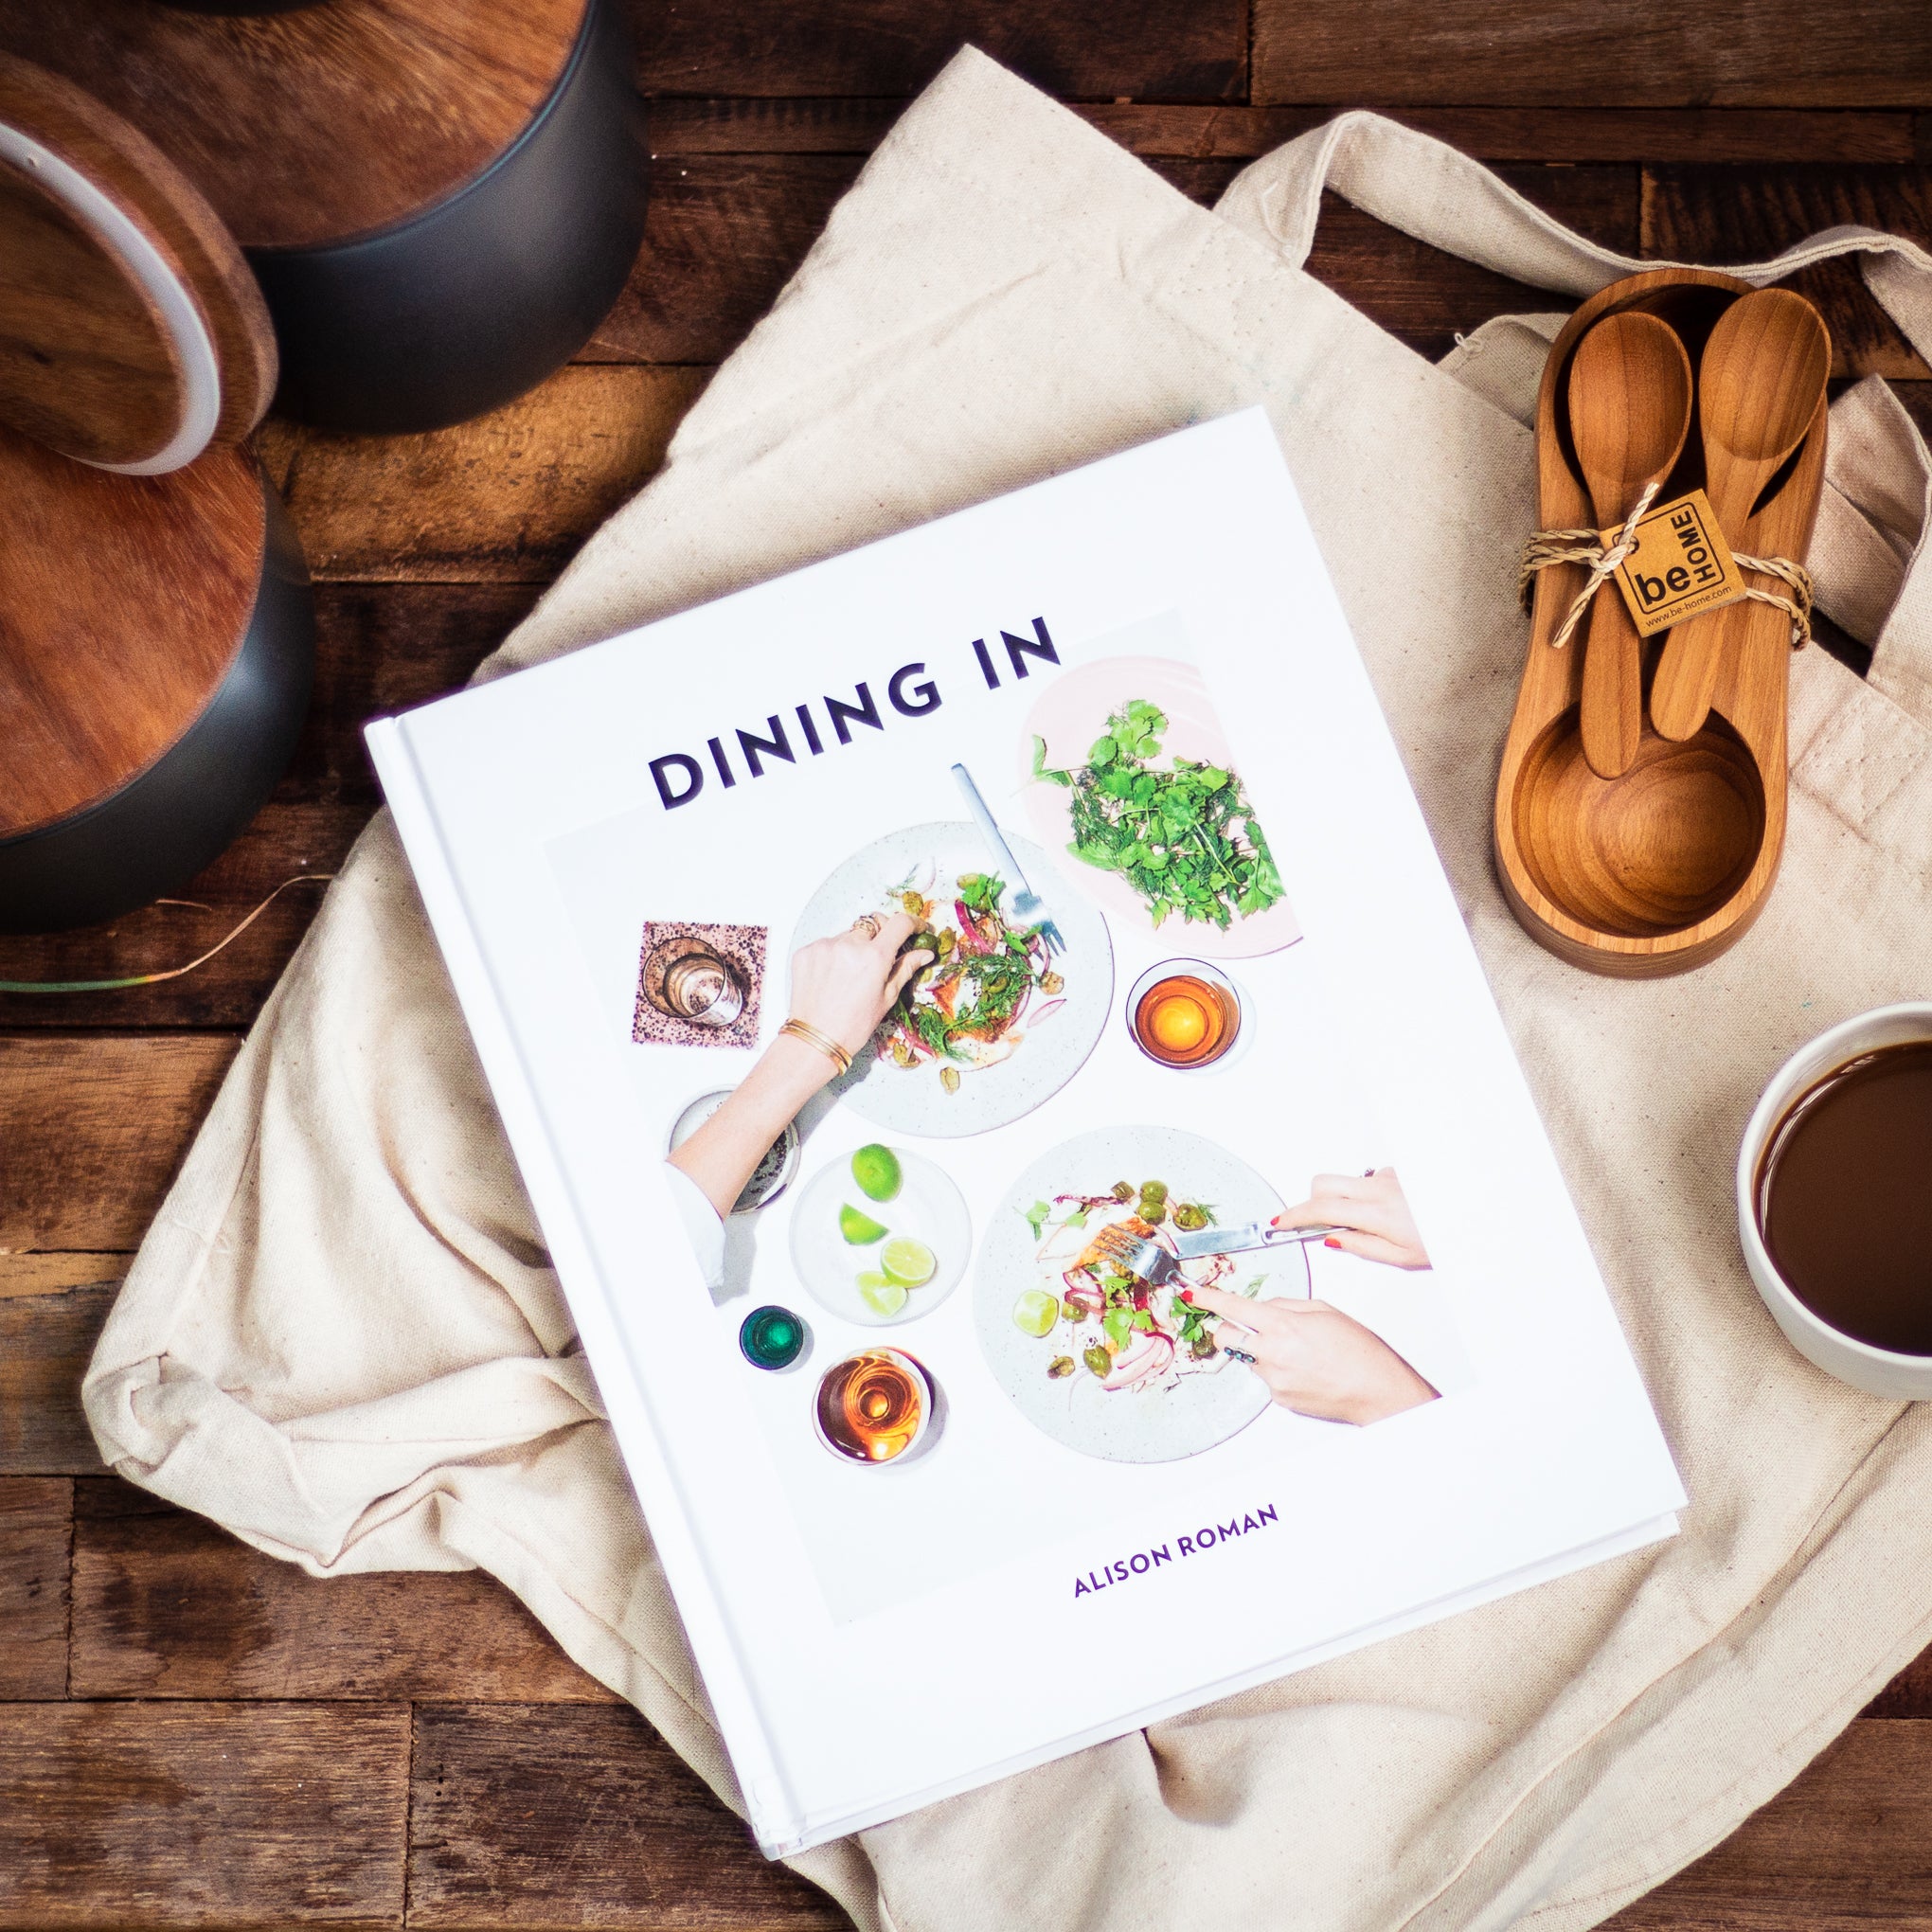 Dining In by Alison Roman